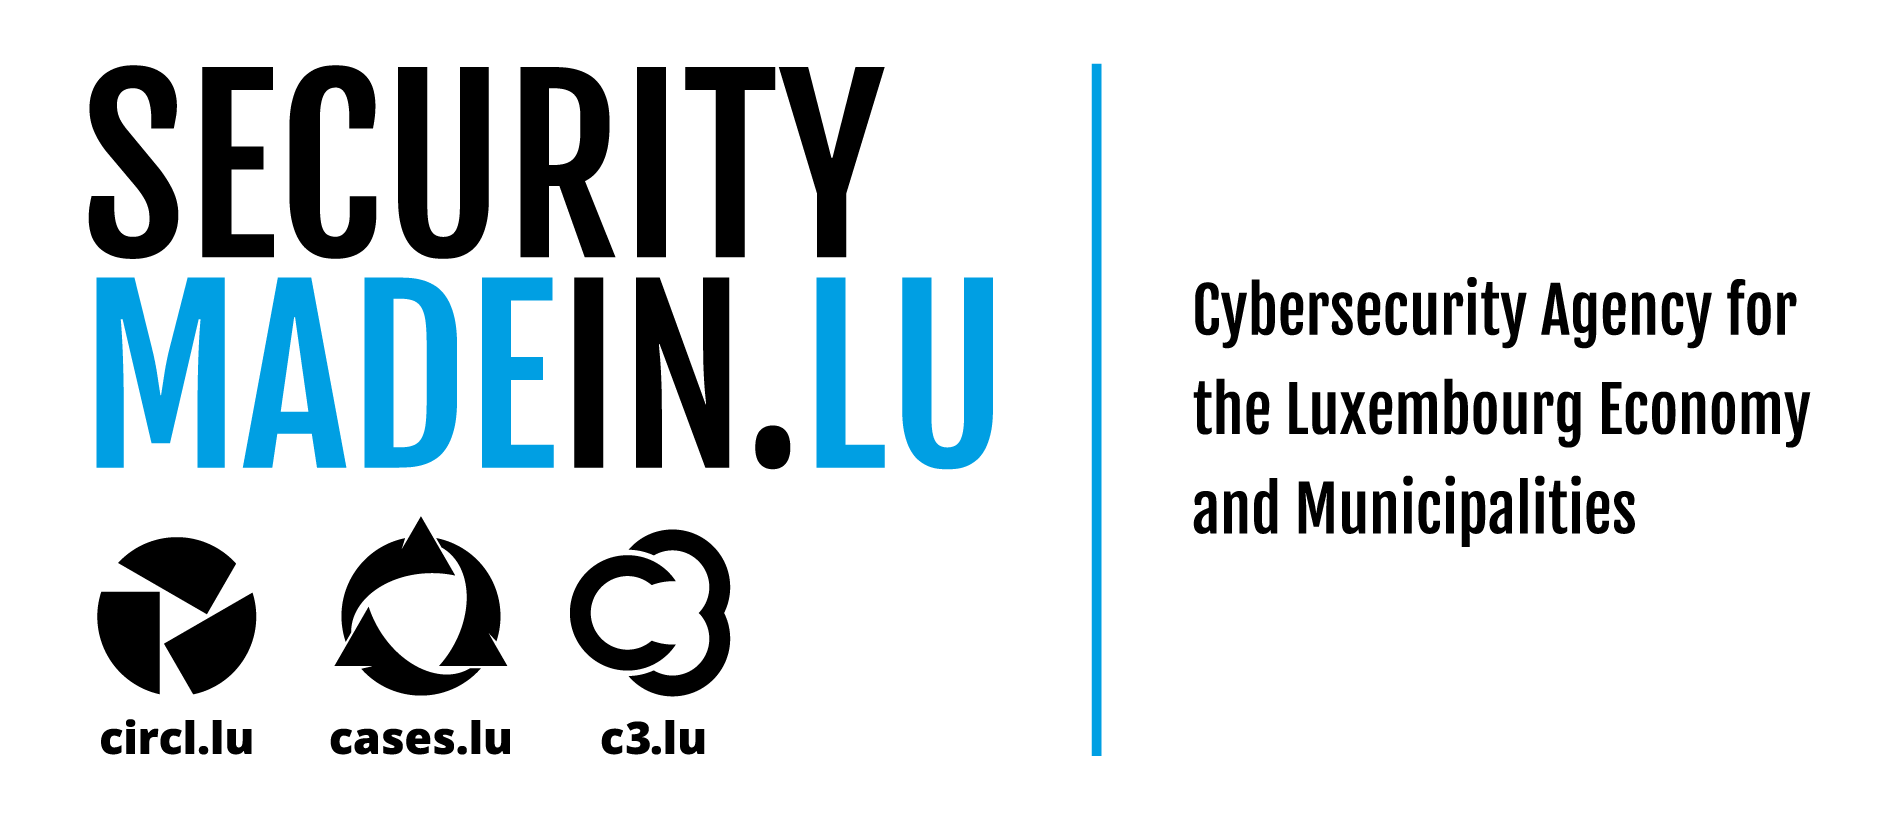 SECURITYMADEIN.LU nominated as National Coordination Center (NCC)